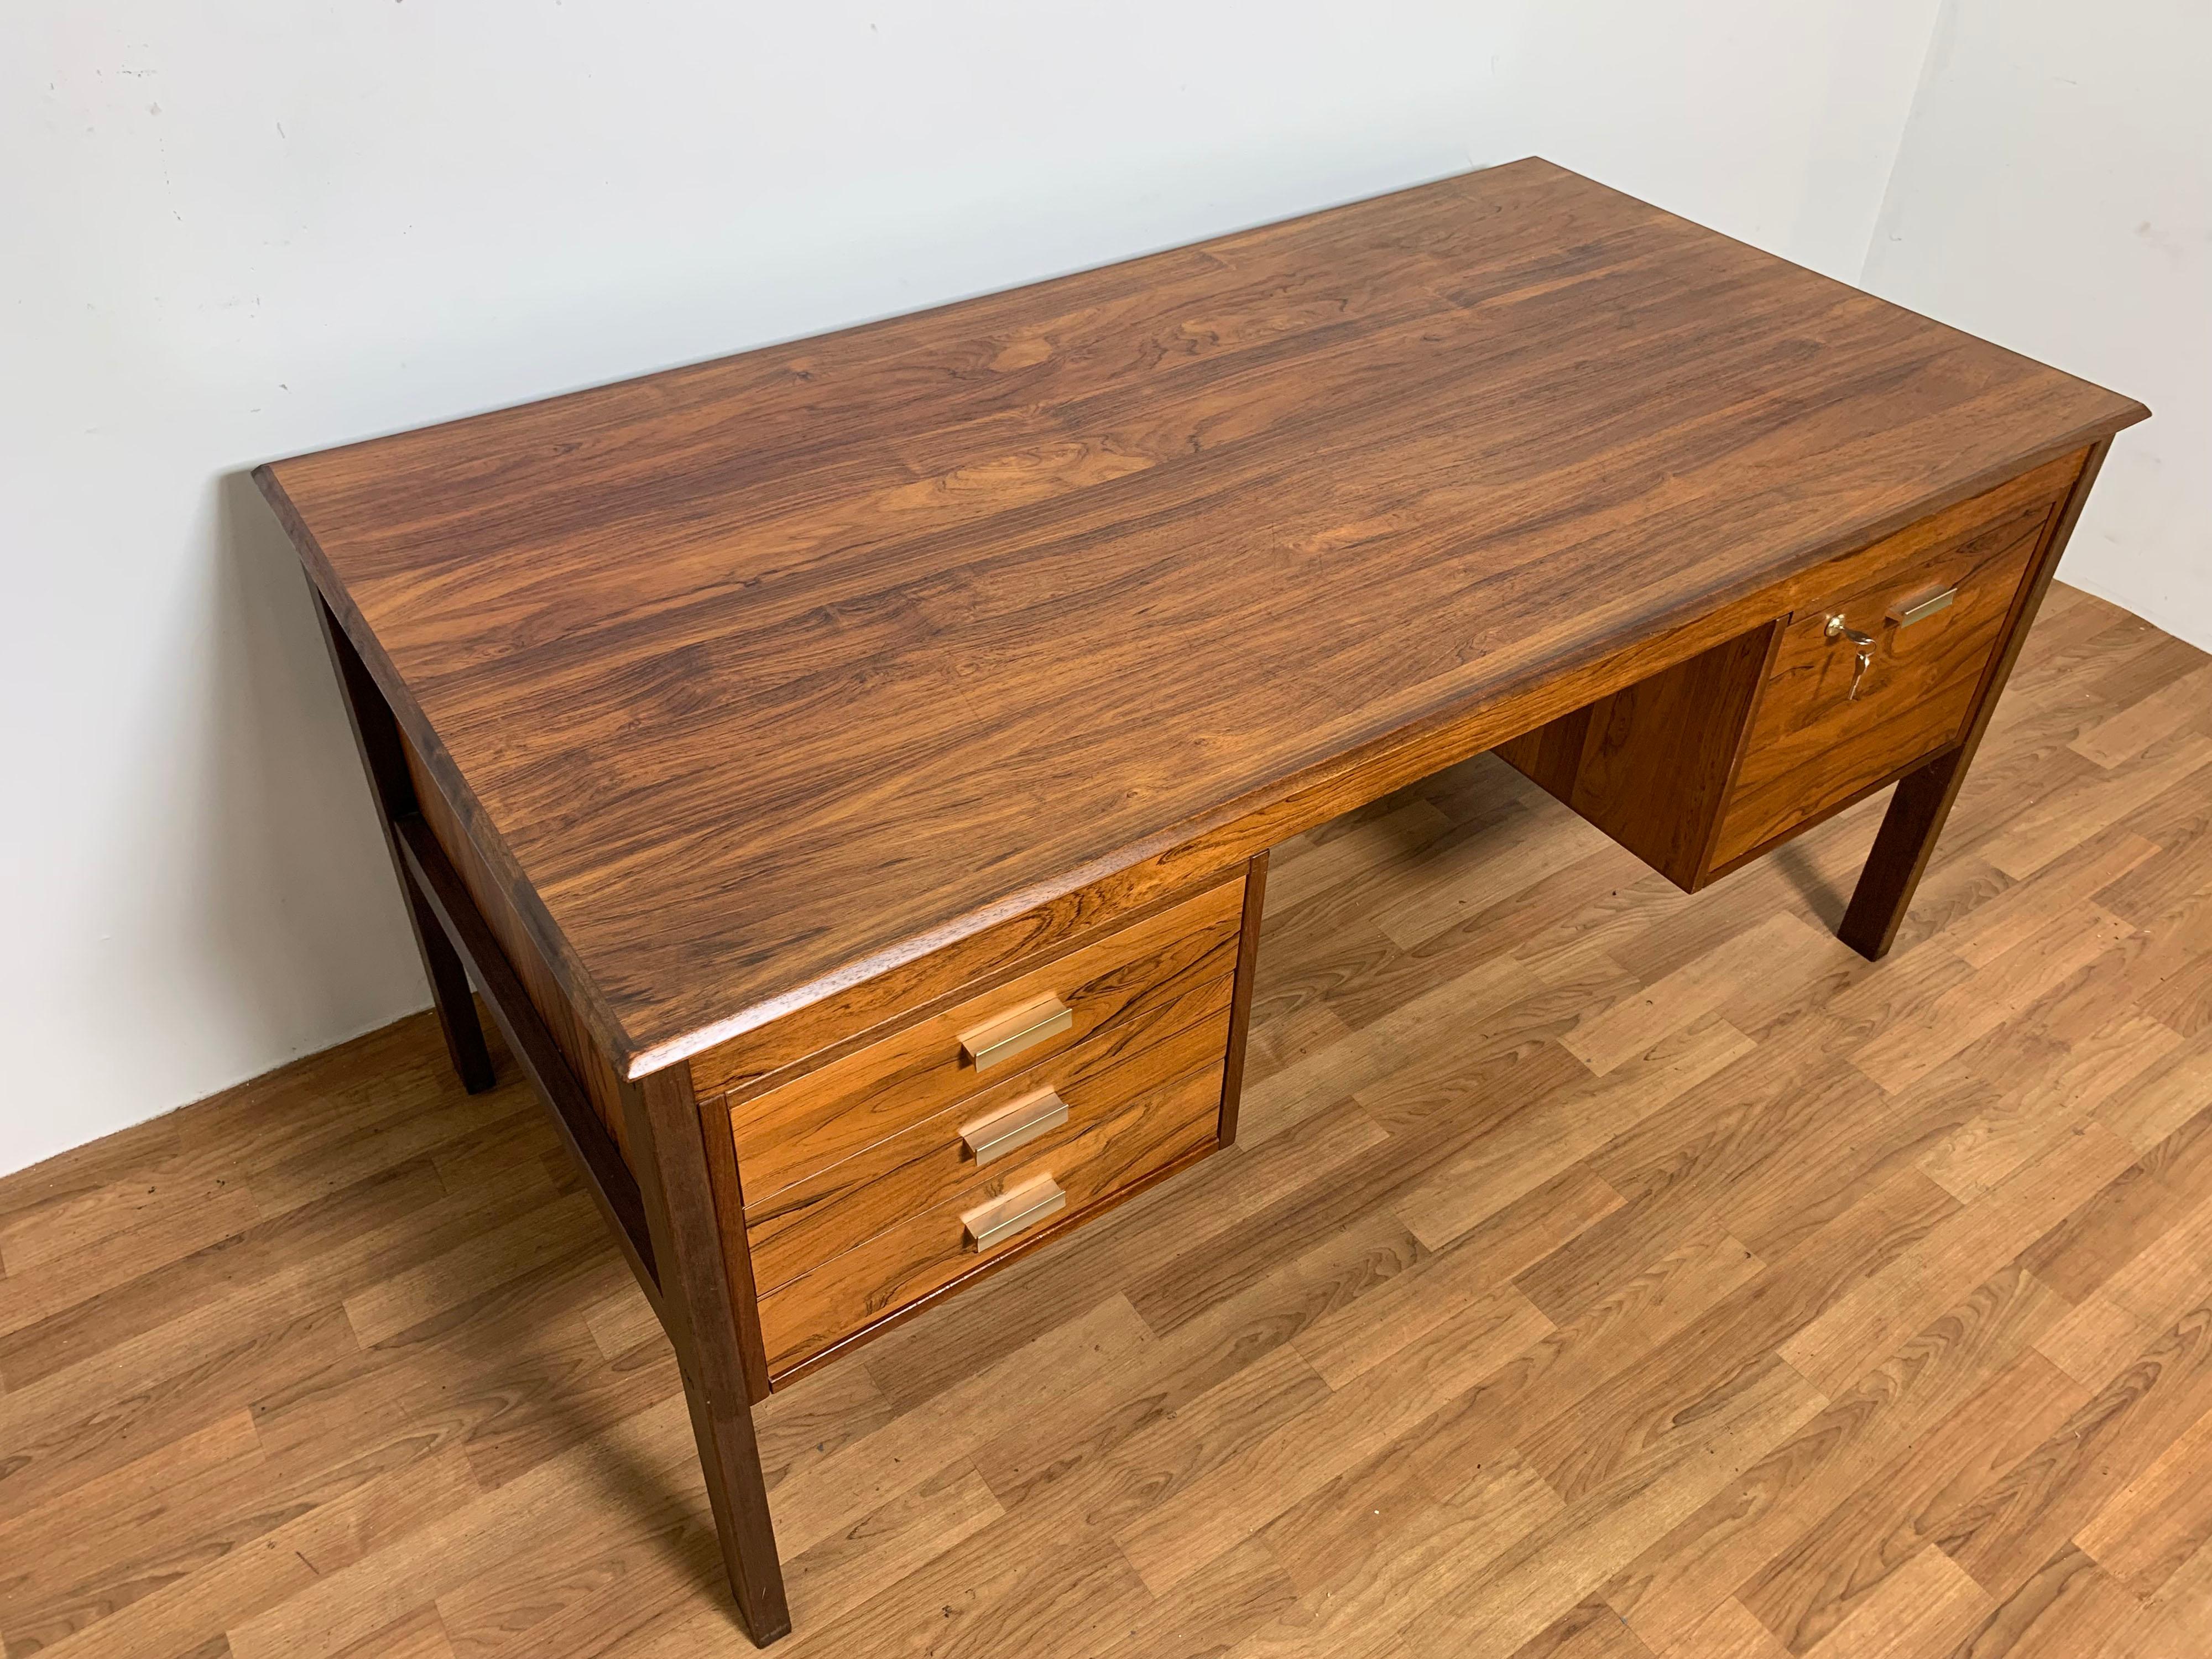 Mid-20th Century Rosewood Mid-Century Modern Desk, Made in Sweden, Circa 1960s